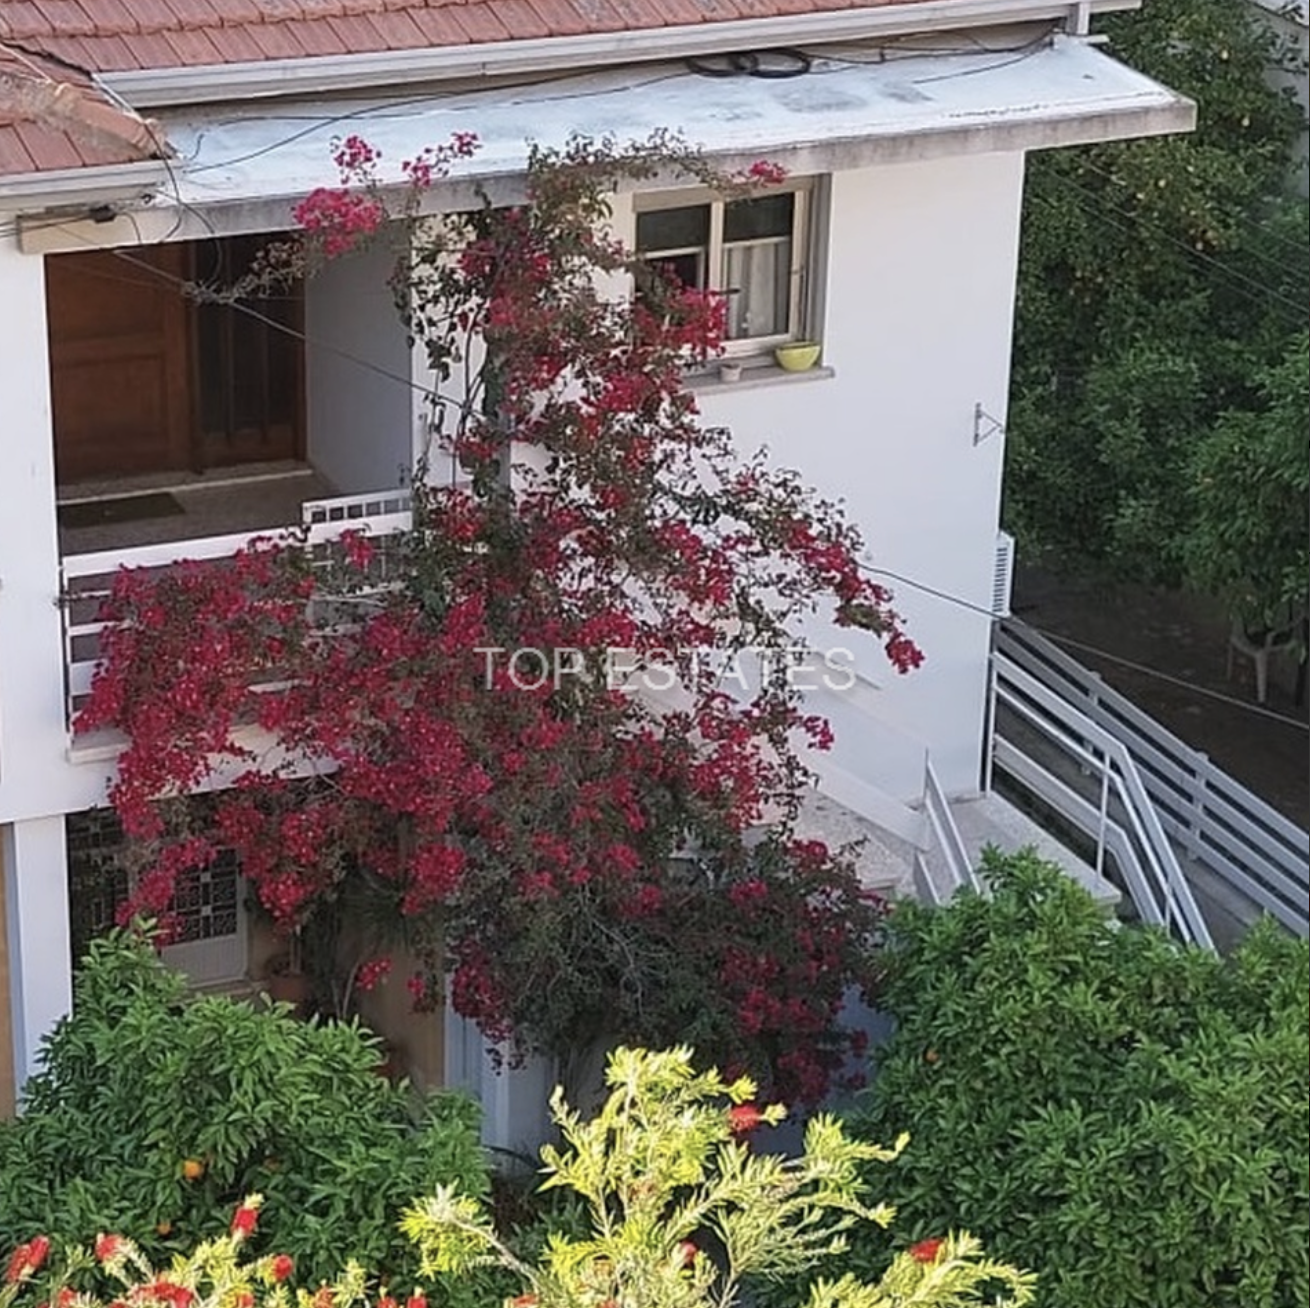 For Rent 3 bedroom apartment in Hilot area Nicosia